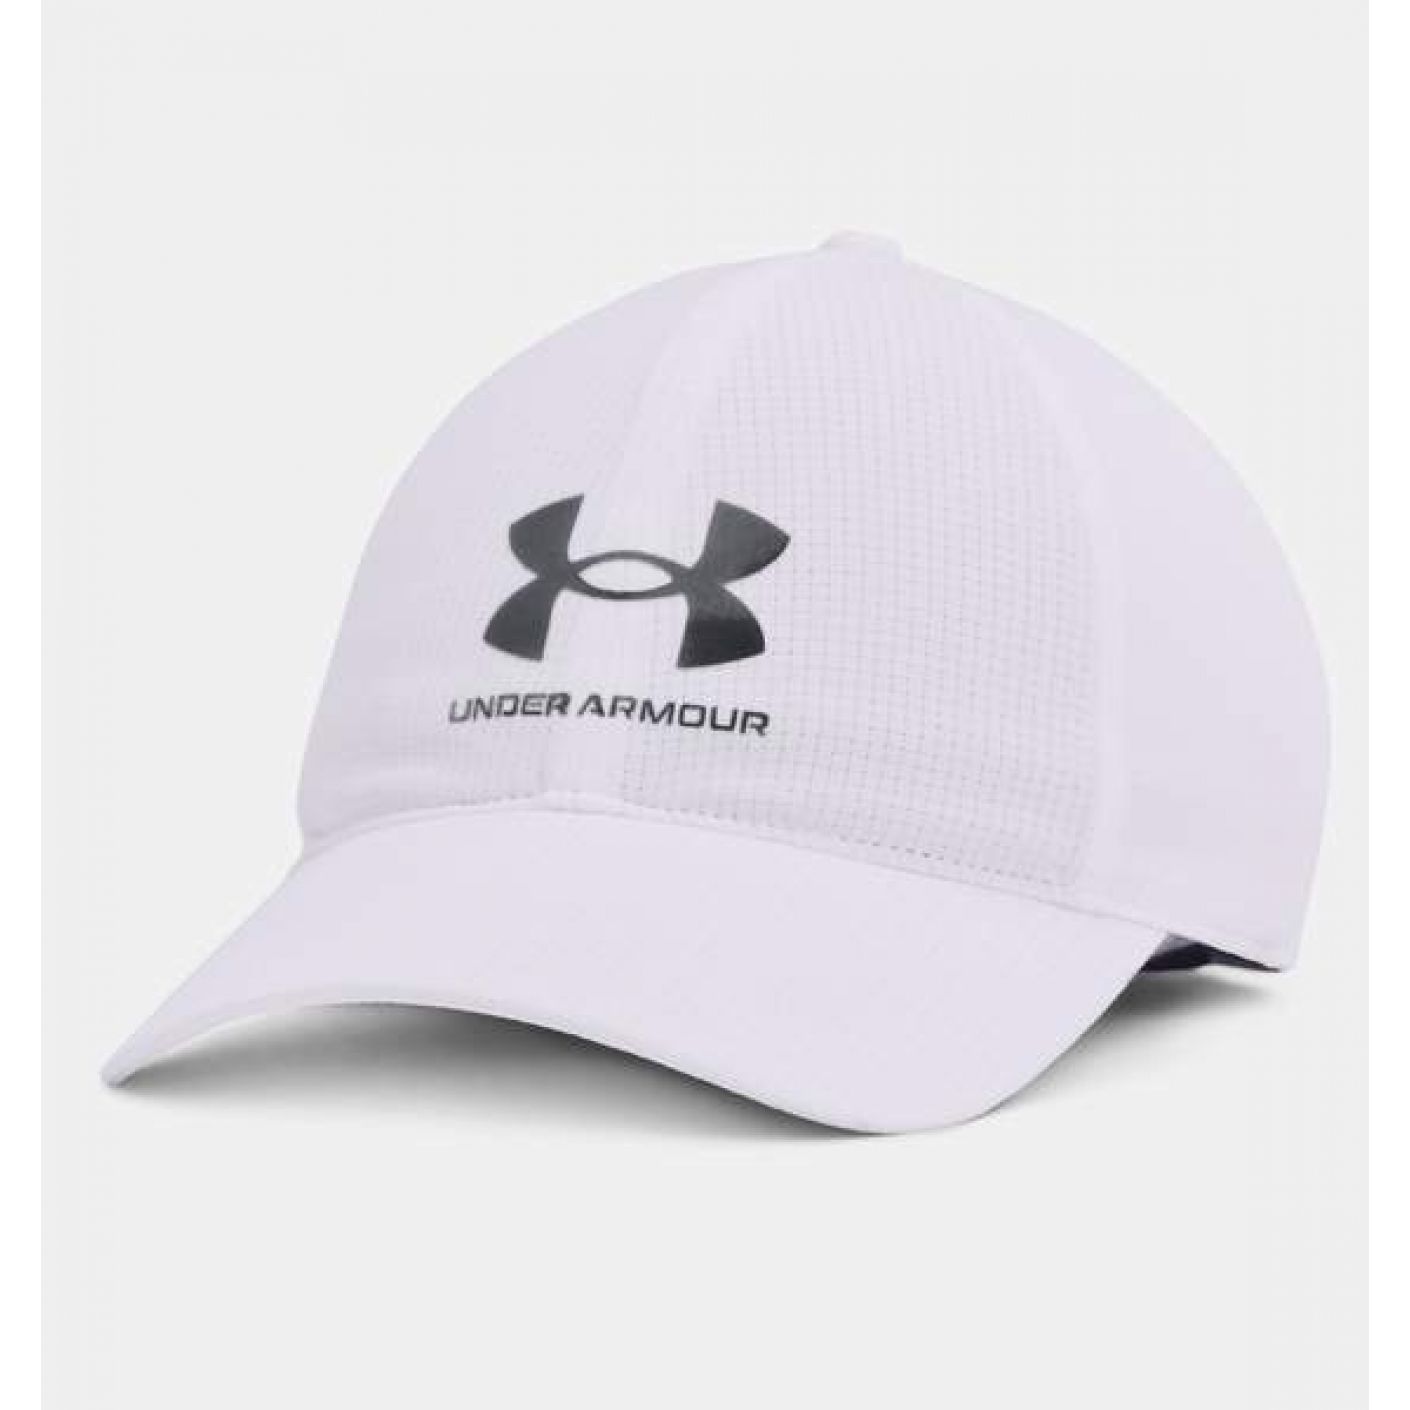 Under Armour Isochill Armourvent Adjustable White